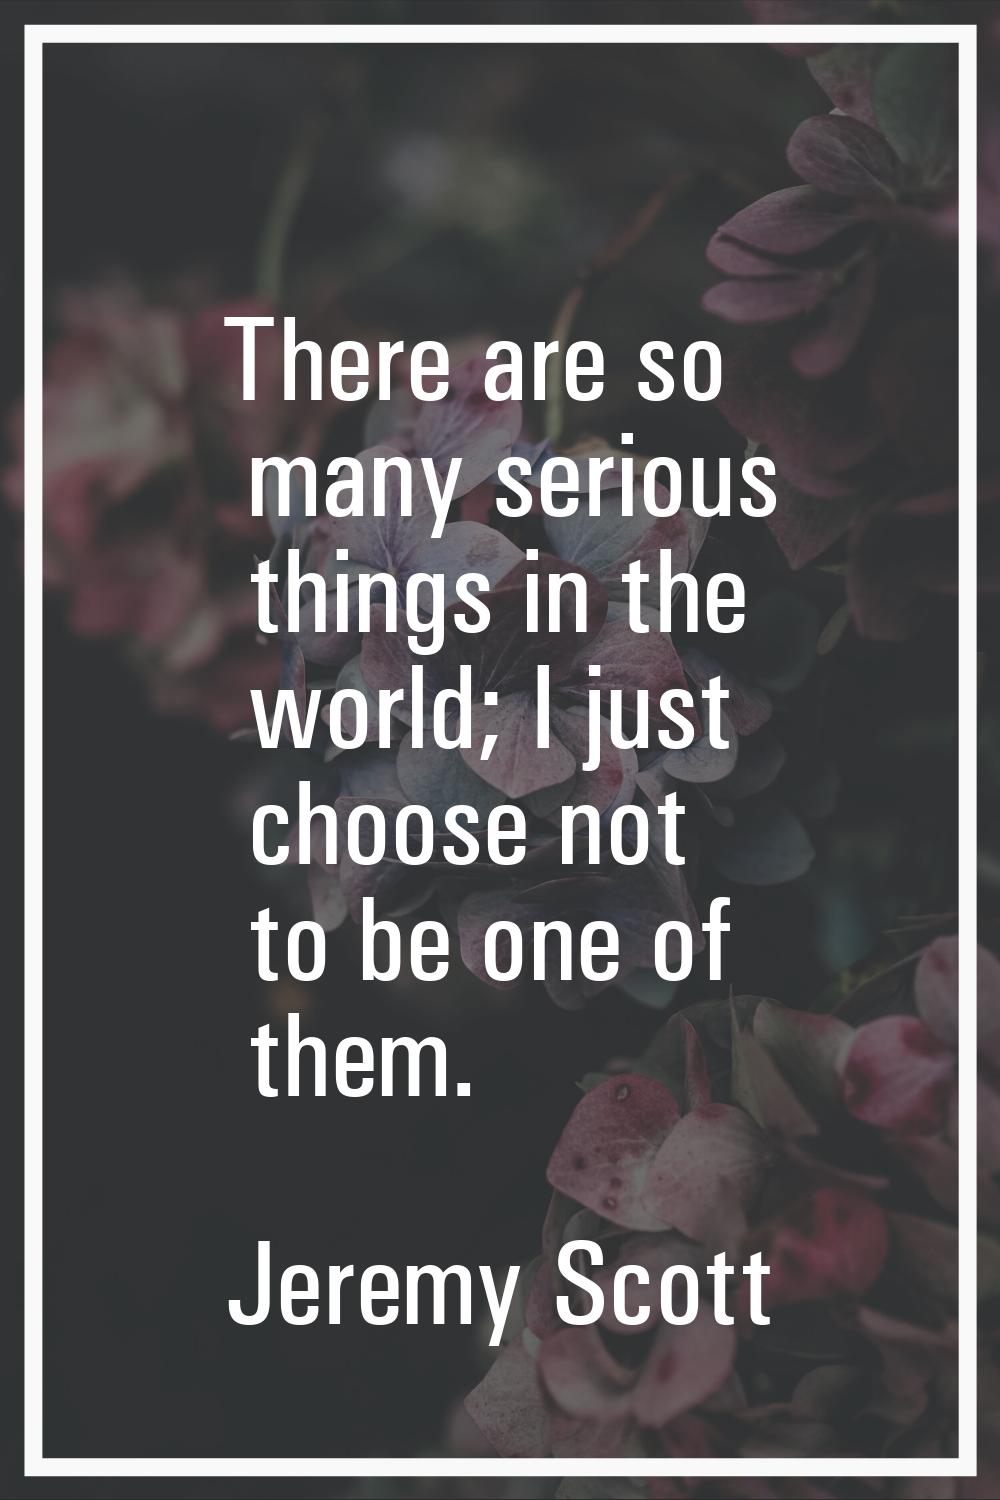 There are so many serious things in the world; I just choose not to be one of them.